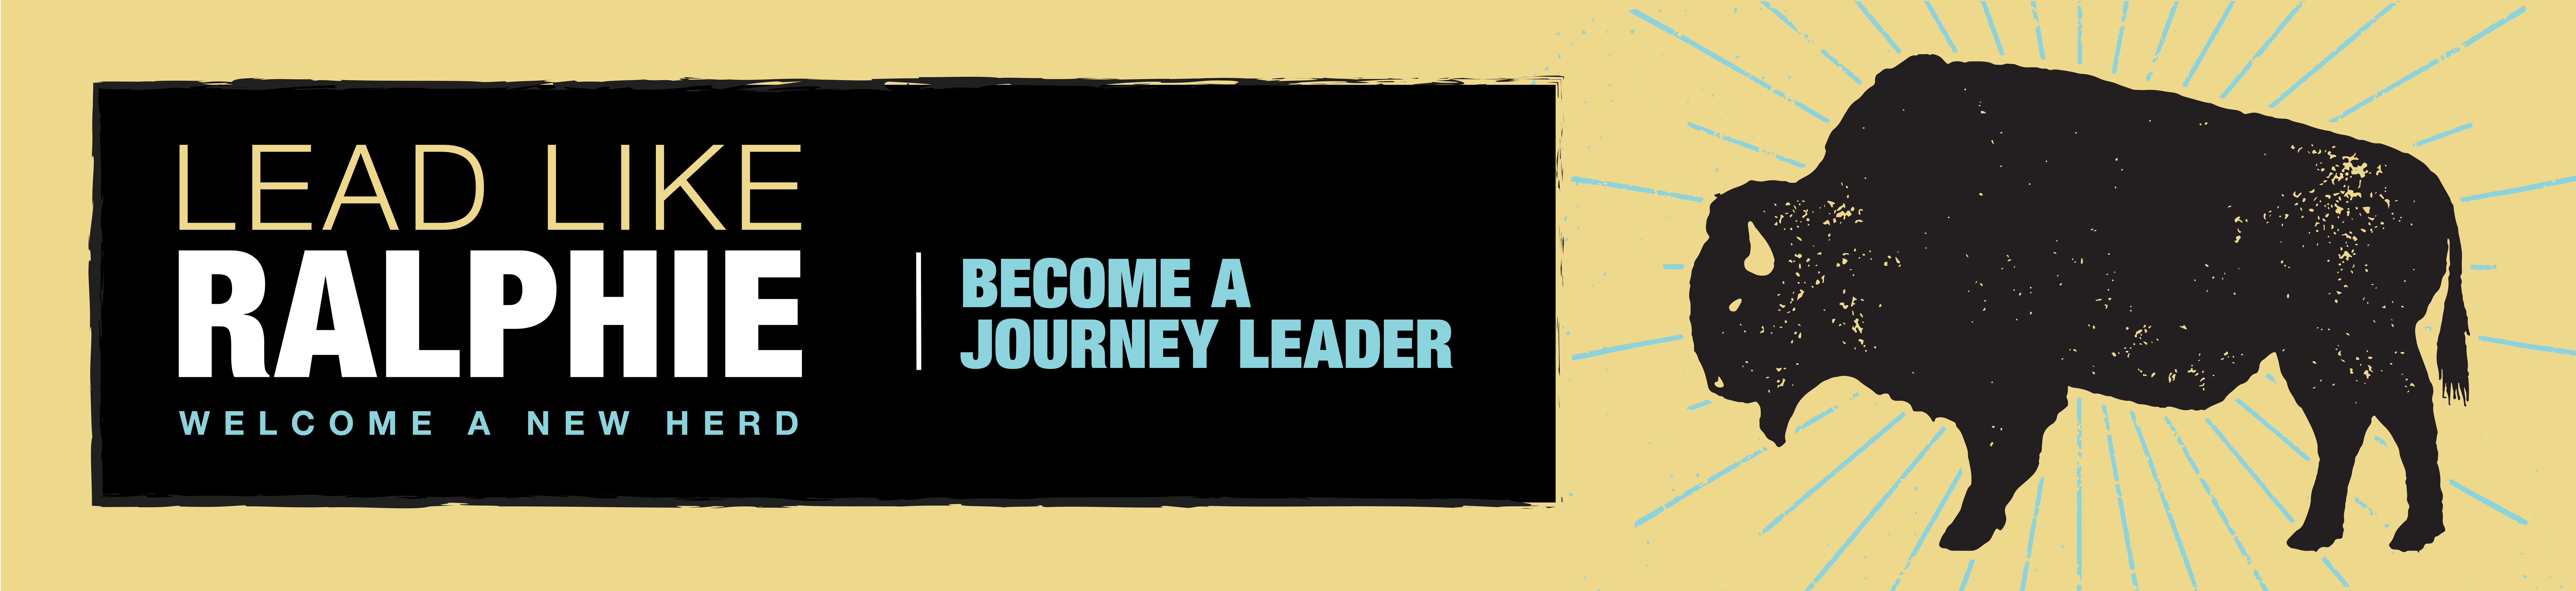 Become a journey leader.